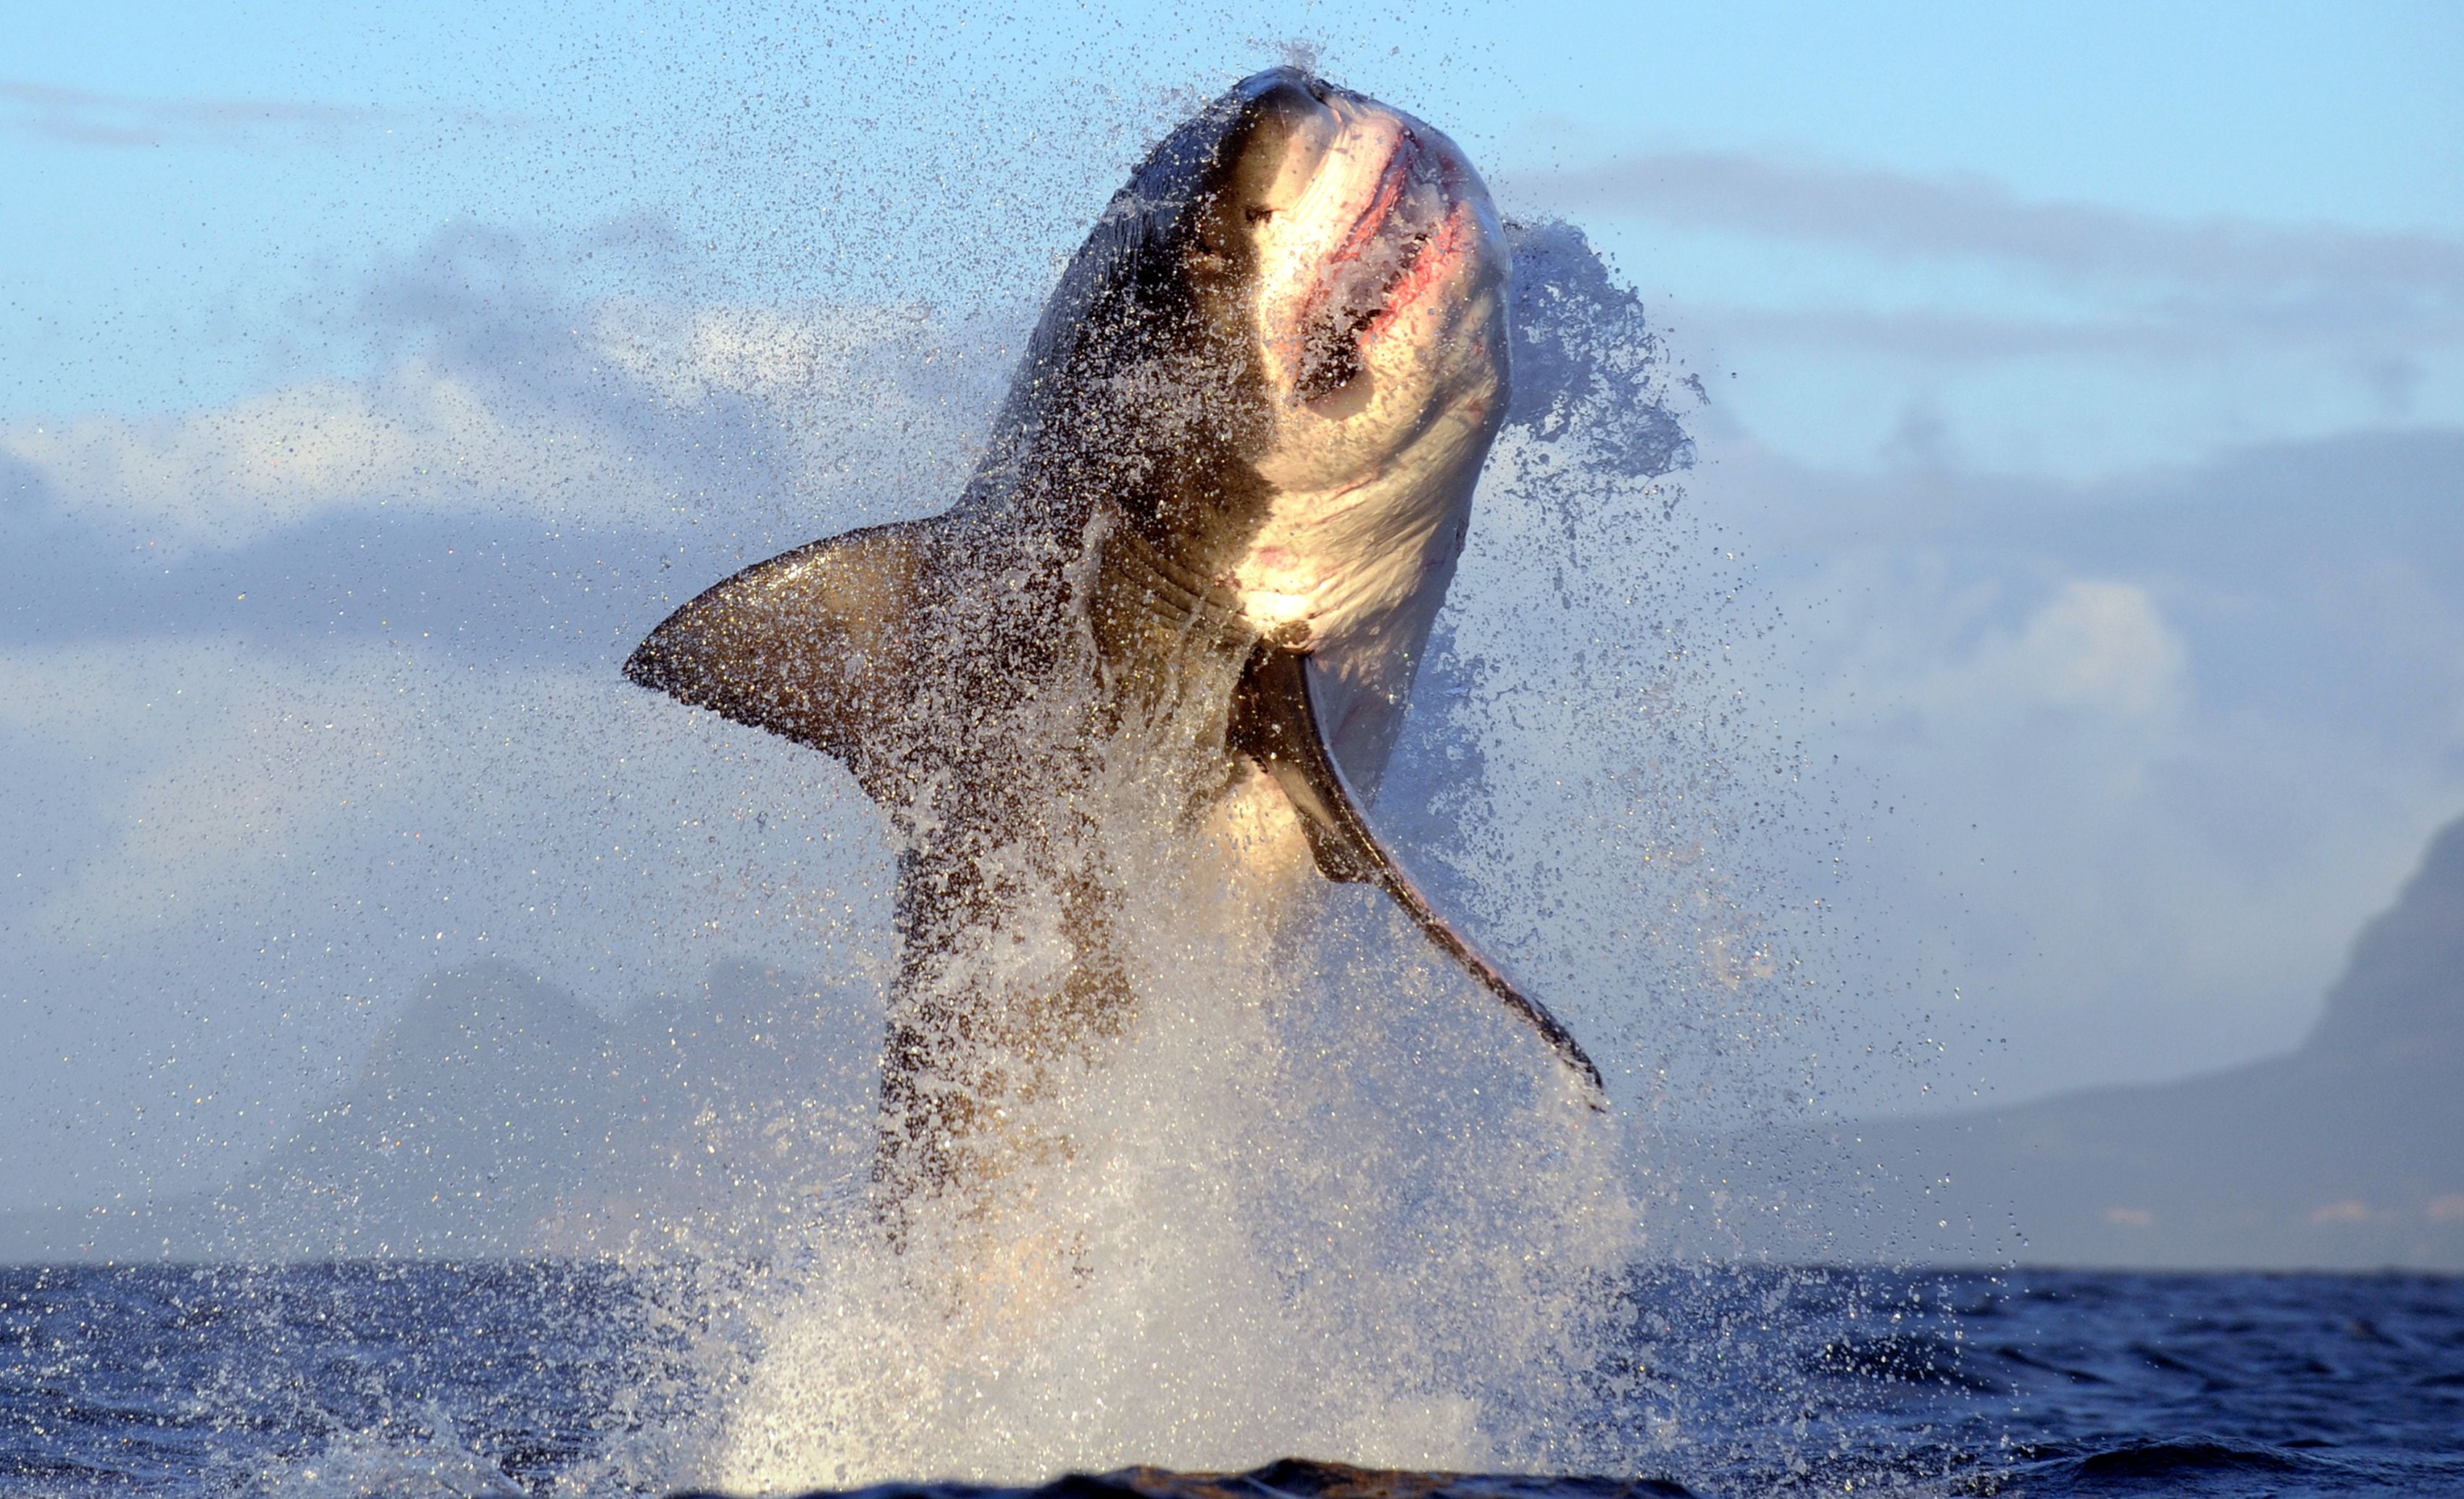 Great white sharks could soon be found in UK waters, researchers say